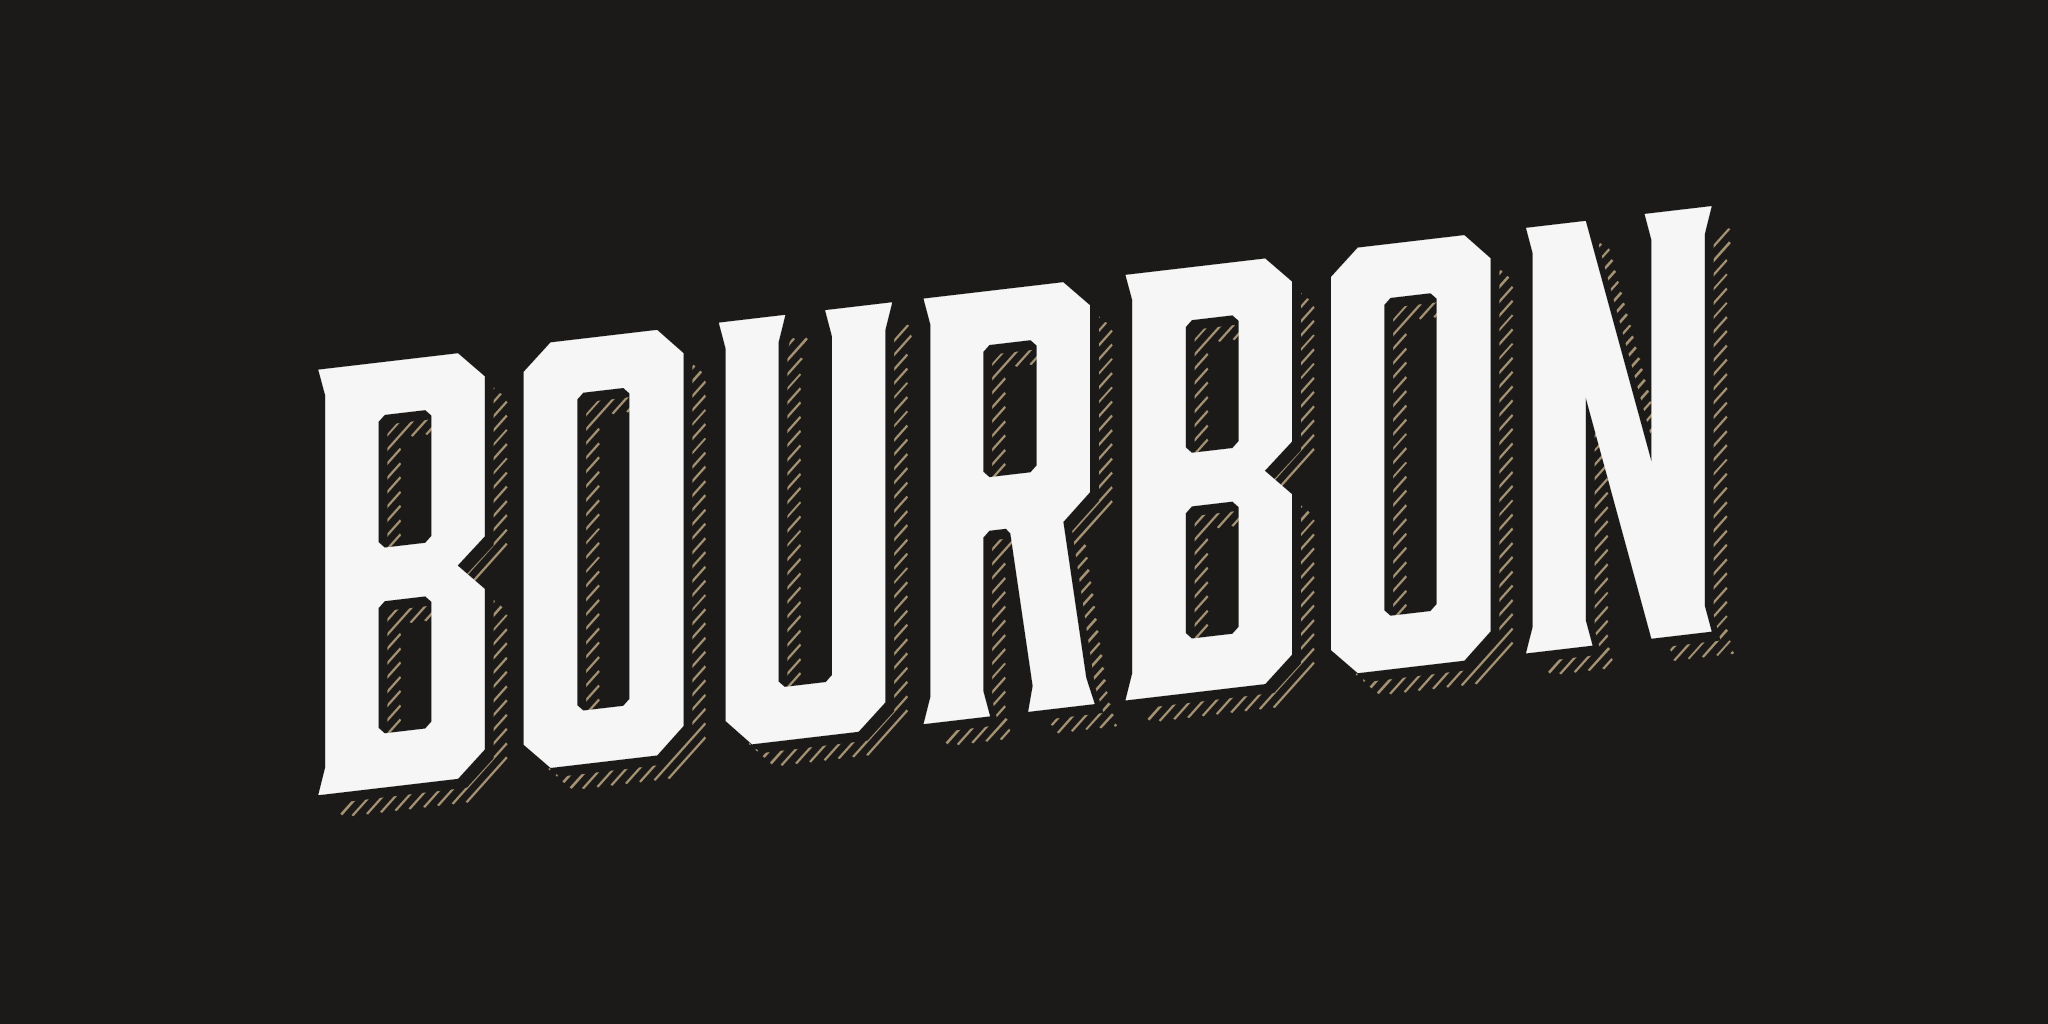 Card displaying Bourbon typeface in various styles